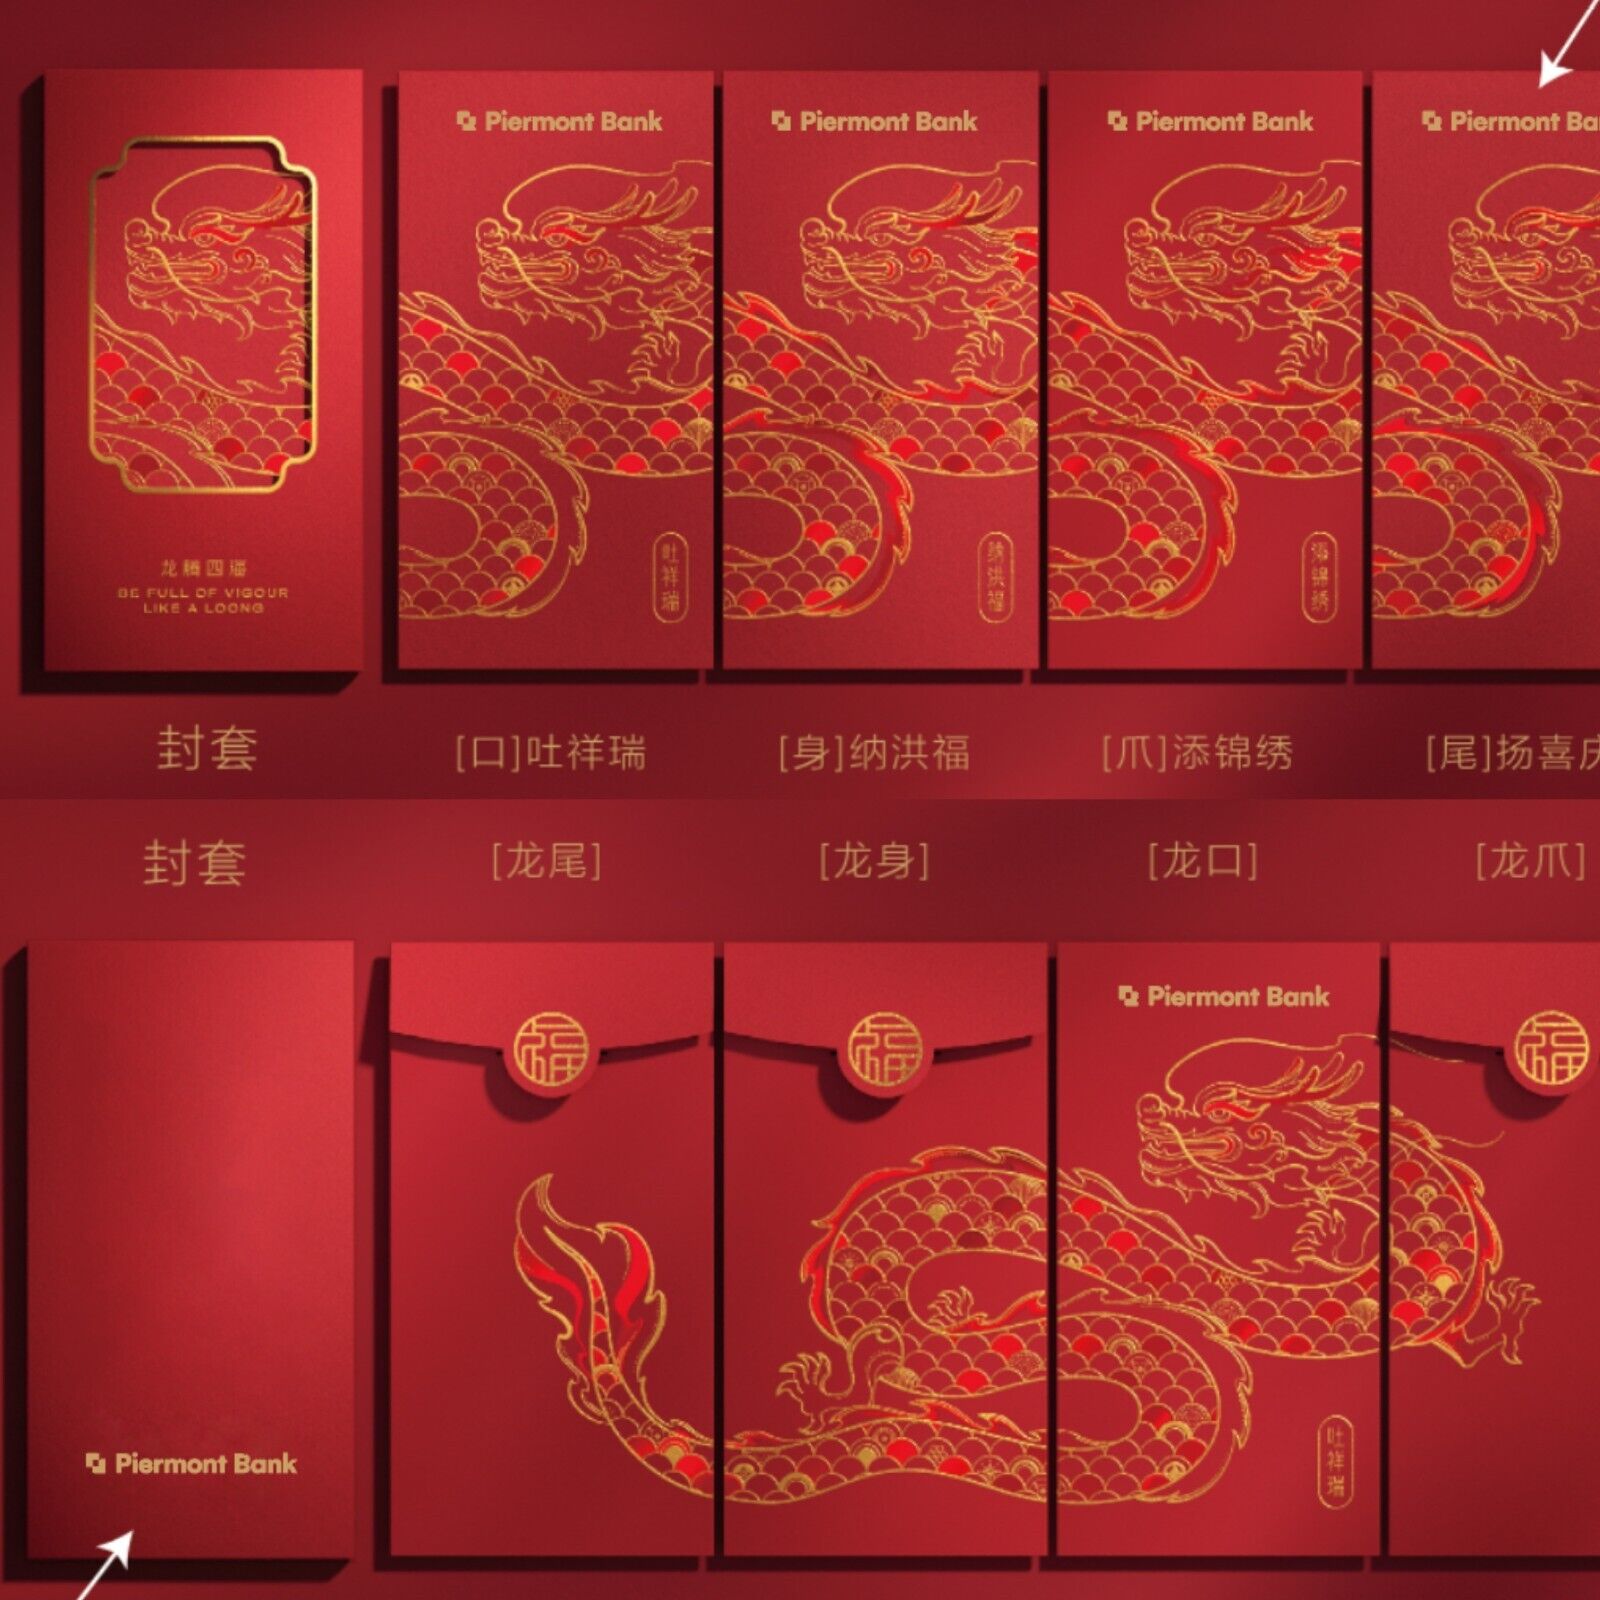 Box of 8 High-end New Year of the Dragon Gold Foil Red Envelope limited Edition